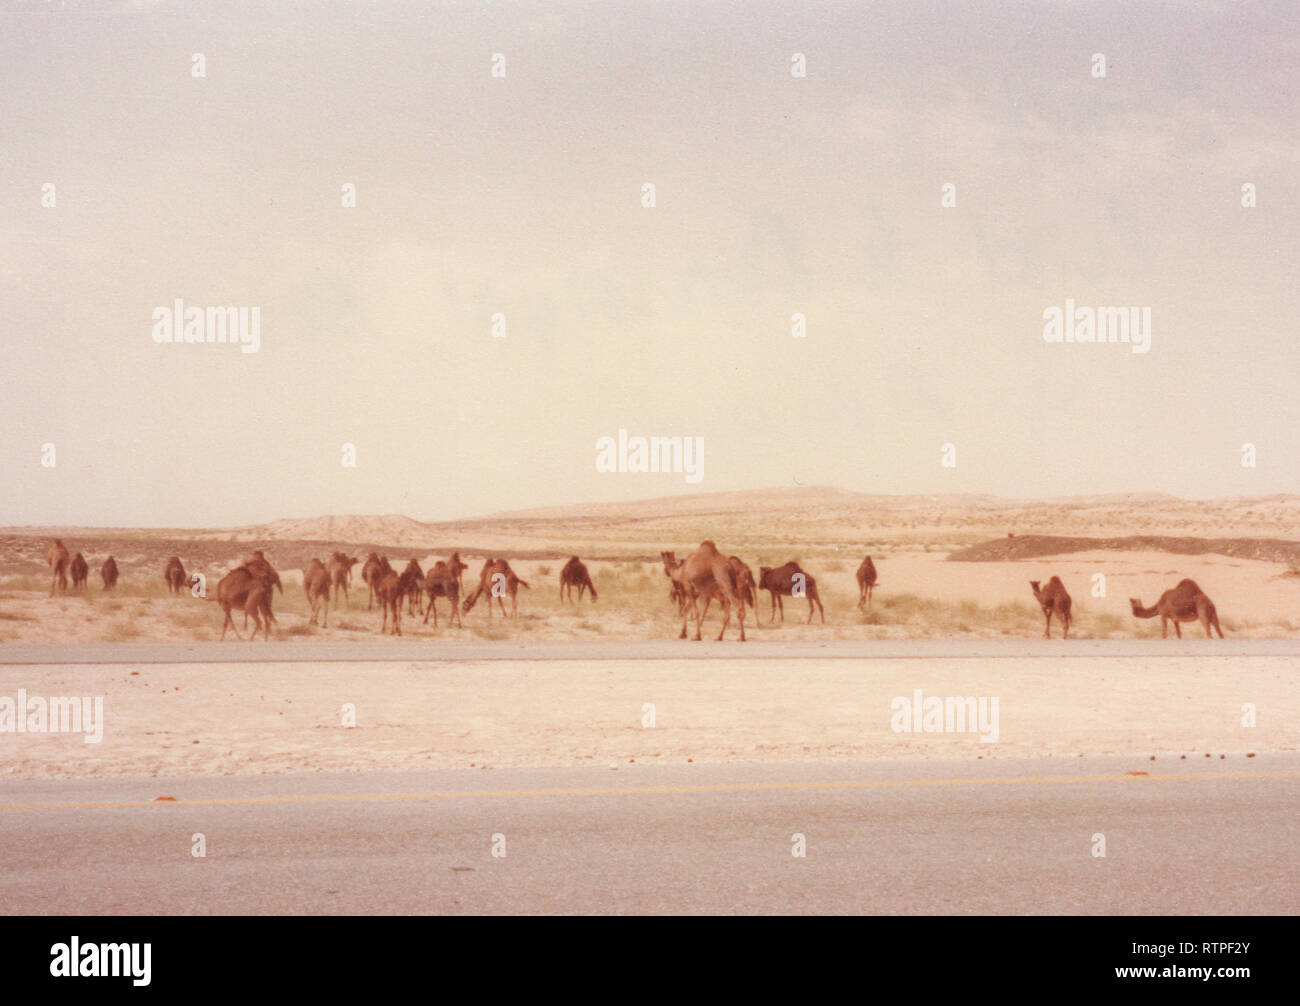 Camels graze and move at their shepherd's direction near Quarrayah Beach, outside of Abqaiq, Saudi Arabia in the late 70s. Stock Photo